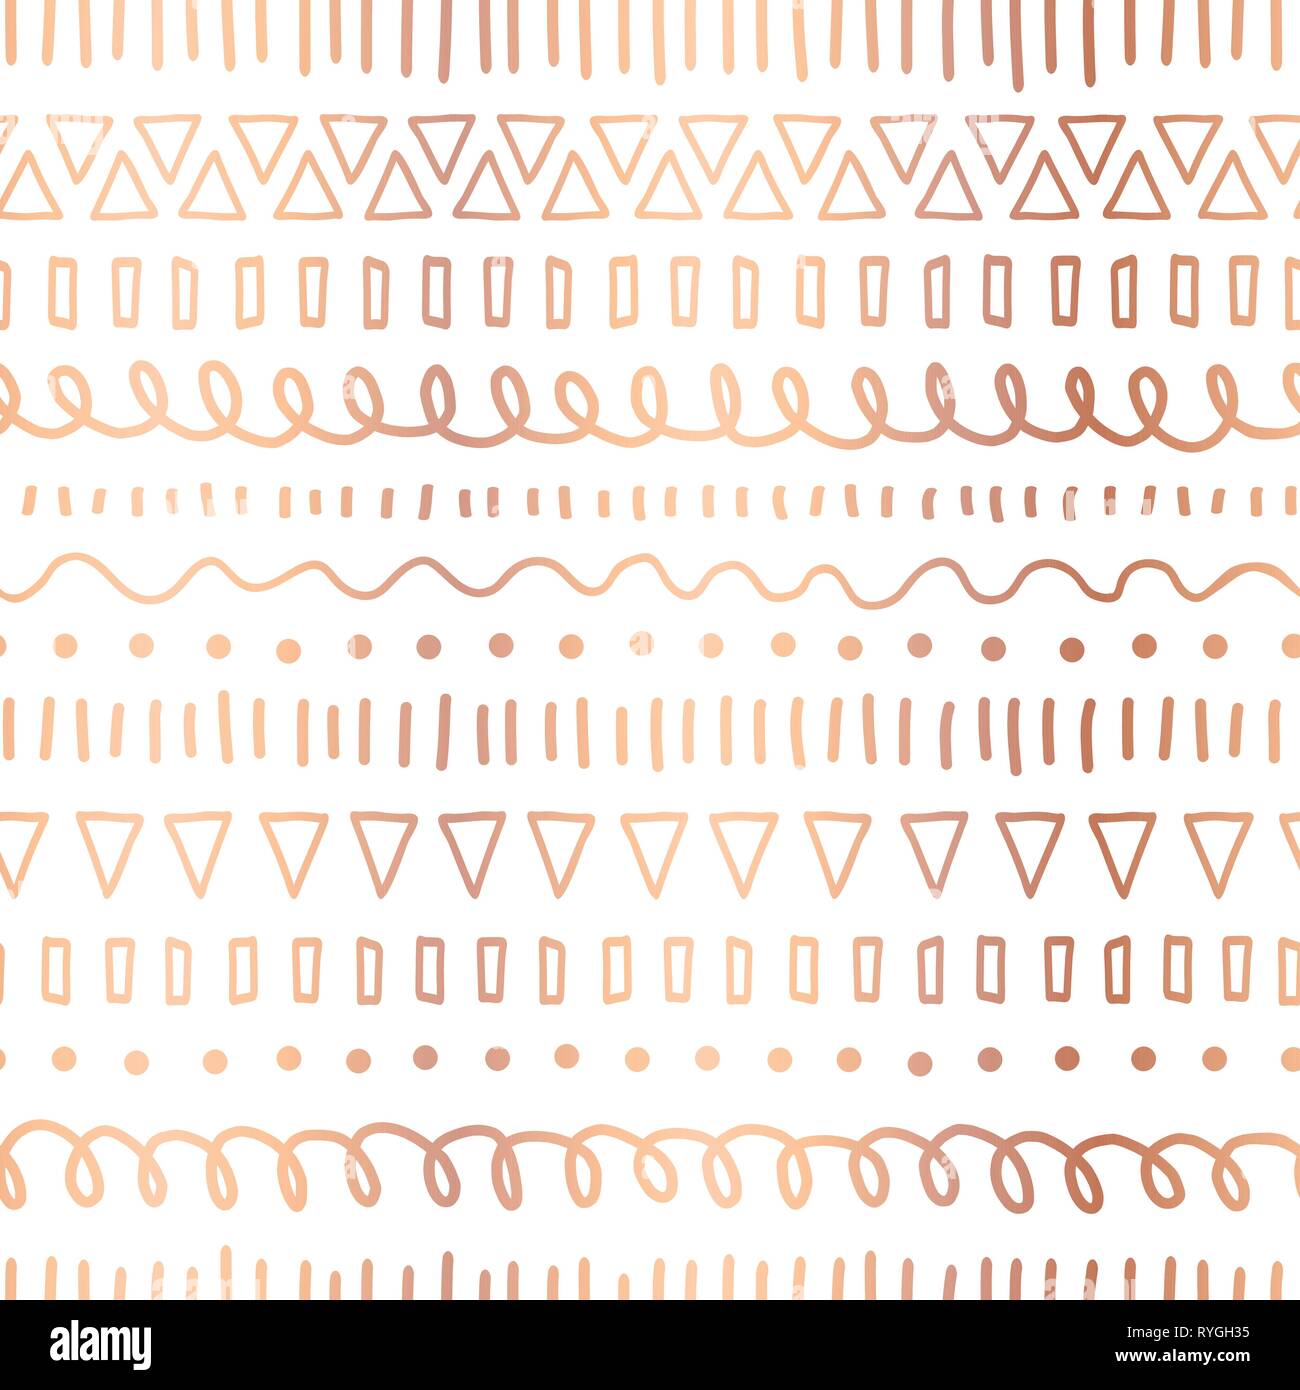 Rose Gold foil doodles seamless vector pattern. Copper Ethnic tribal motifs. Hand drawn metallic strokes, lines, triangles repeating background. Party Stock Vector